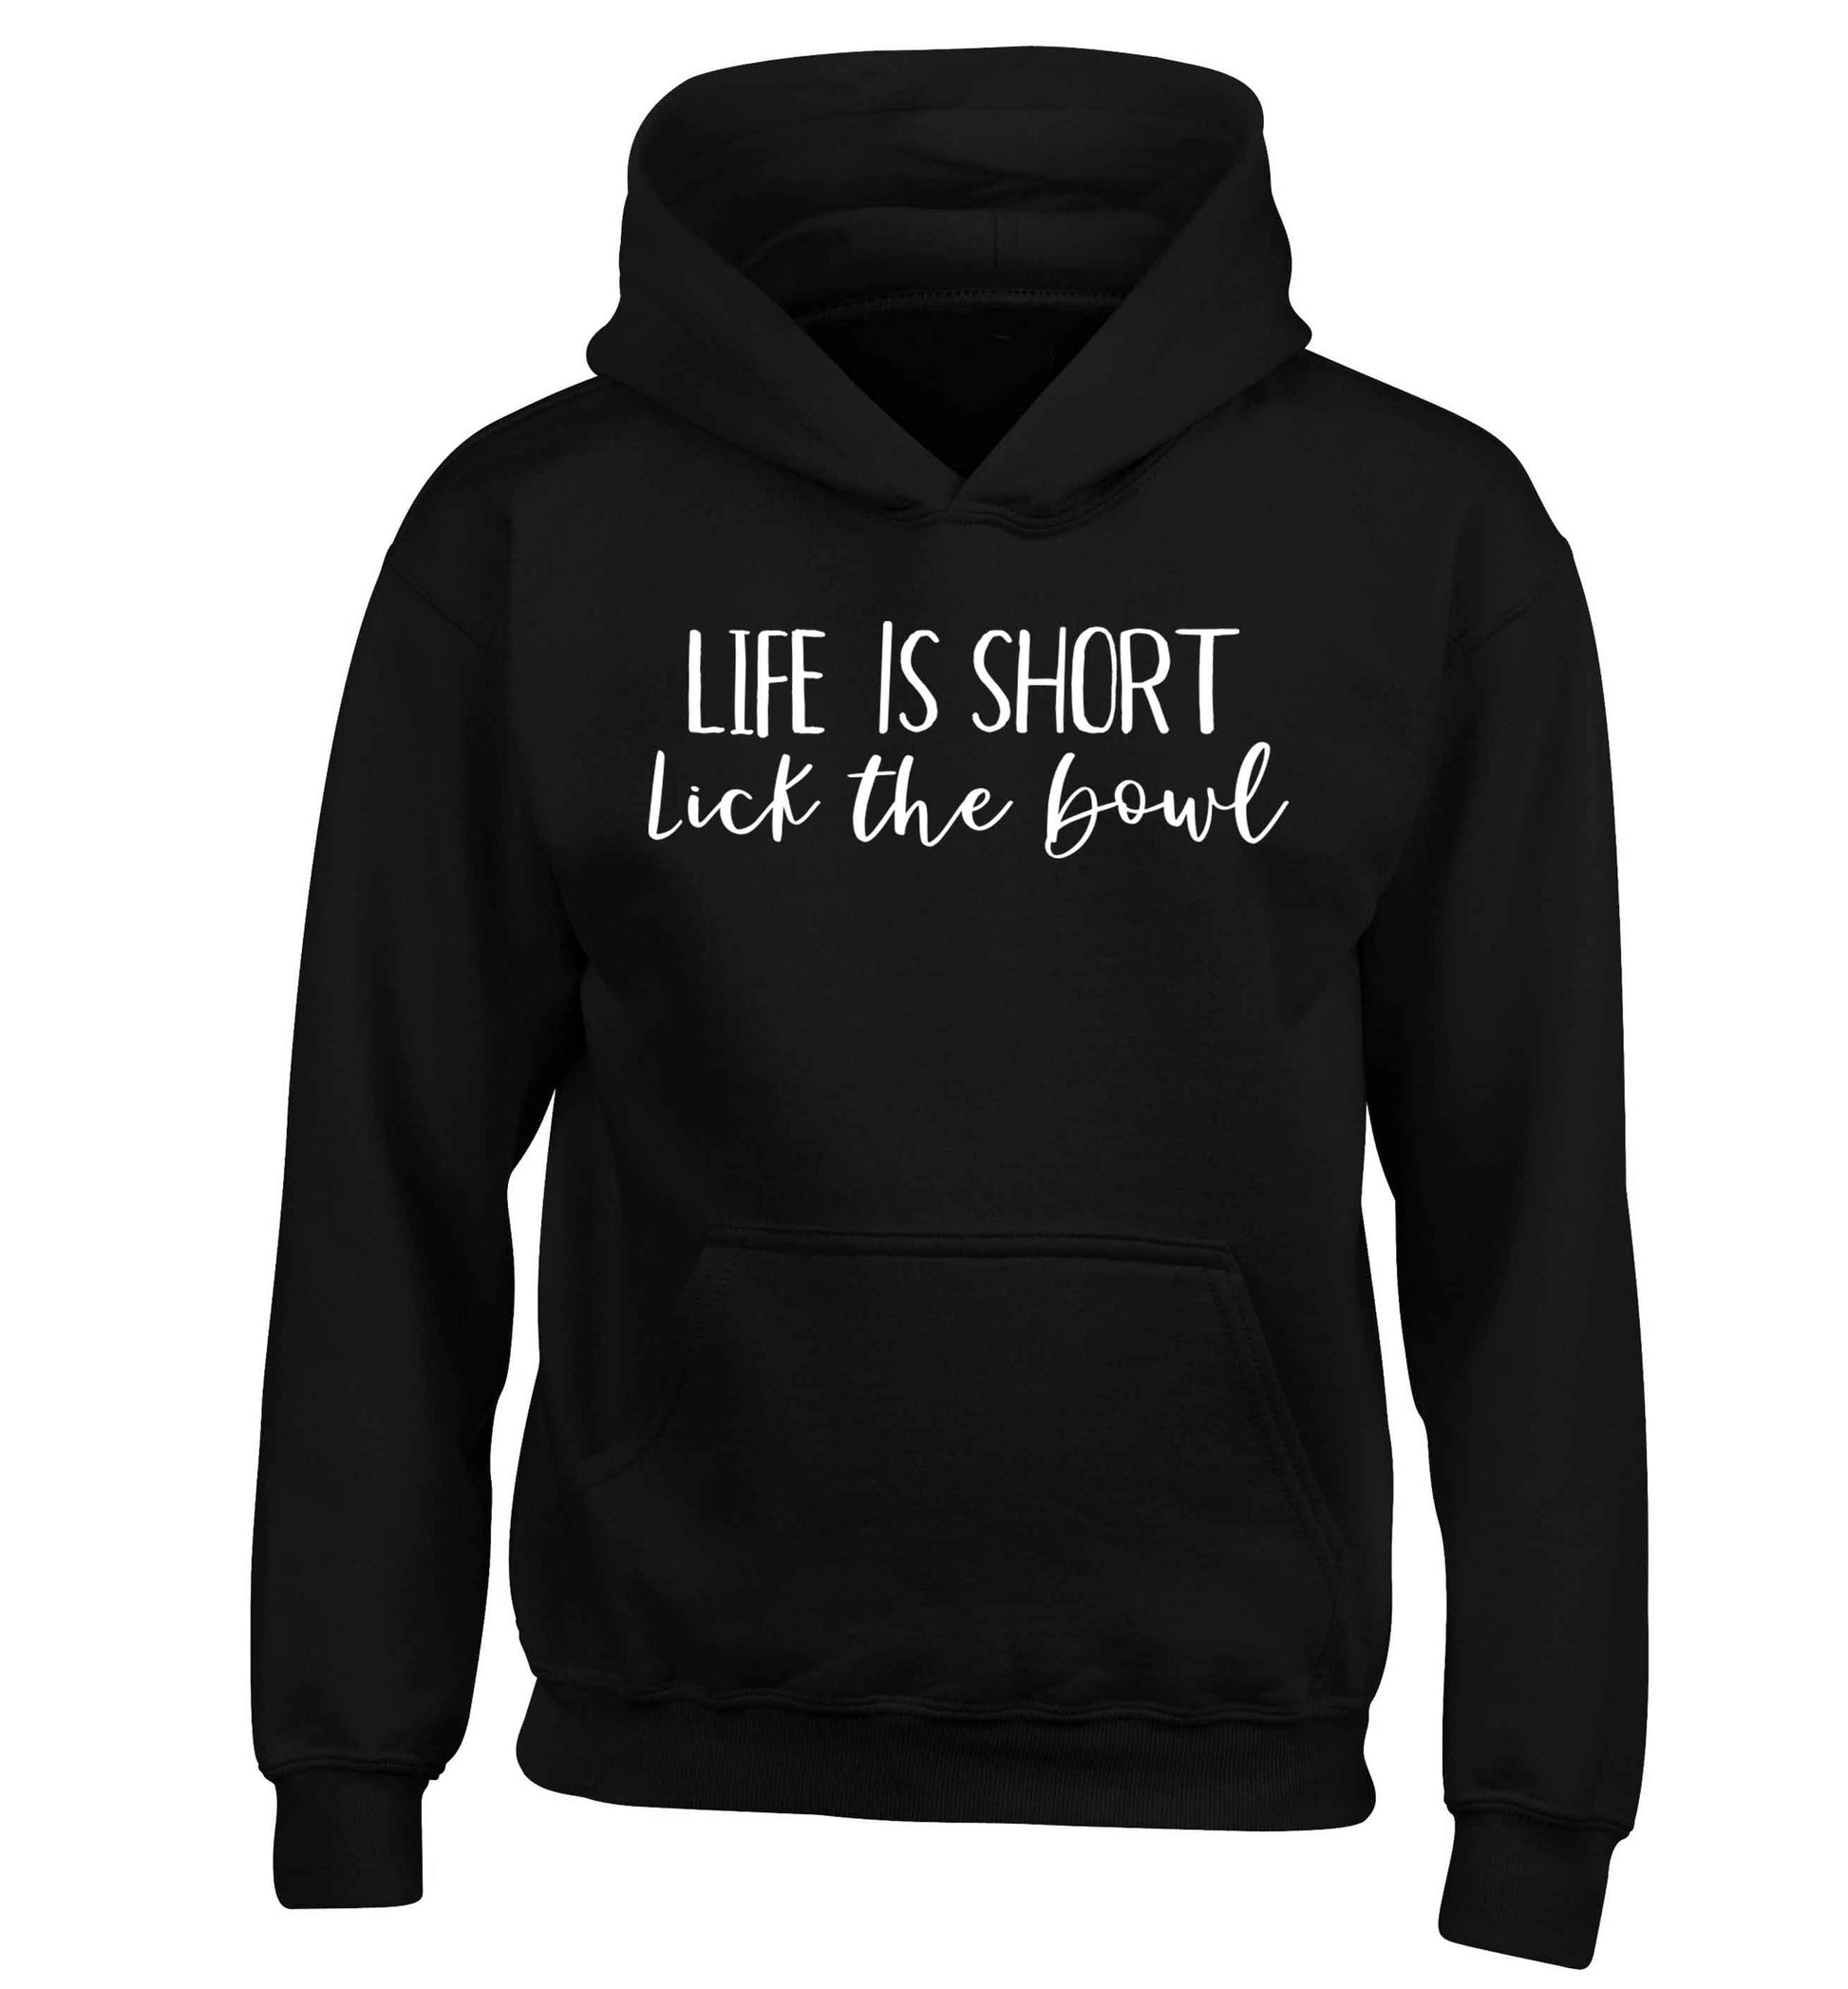 Life is short lick the bowl children's black hoodie 12-13 Years